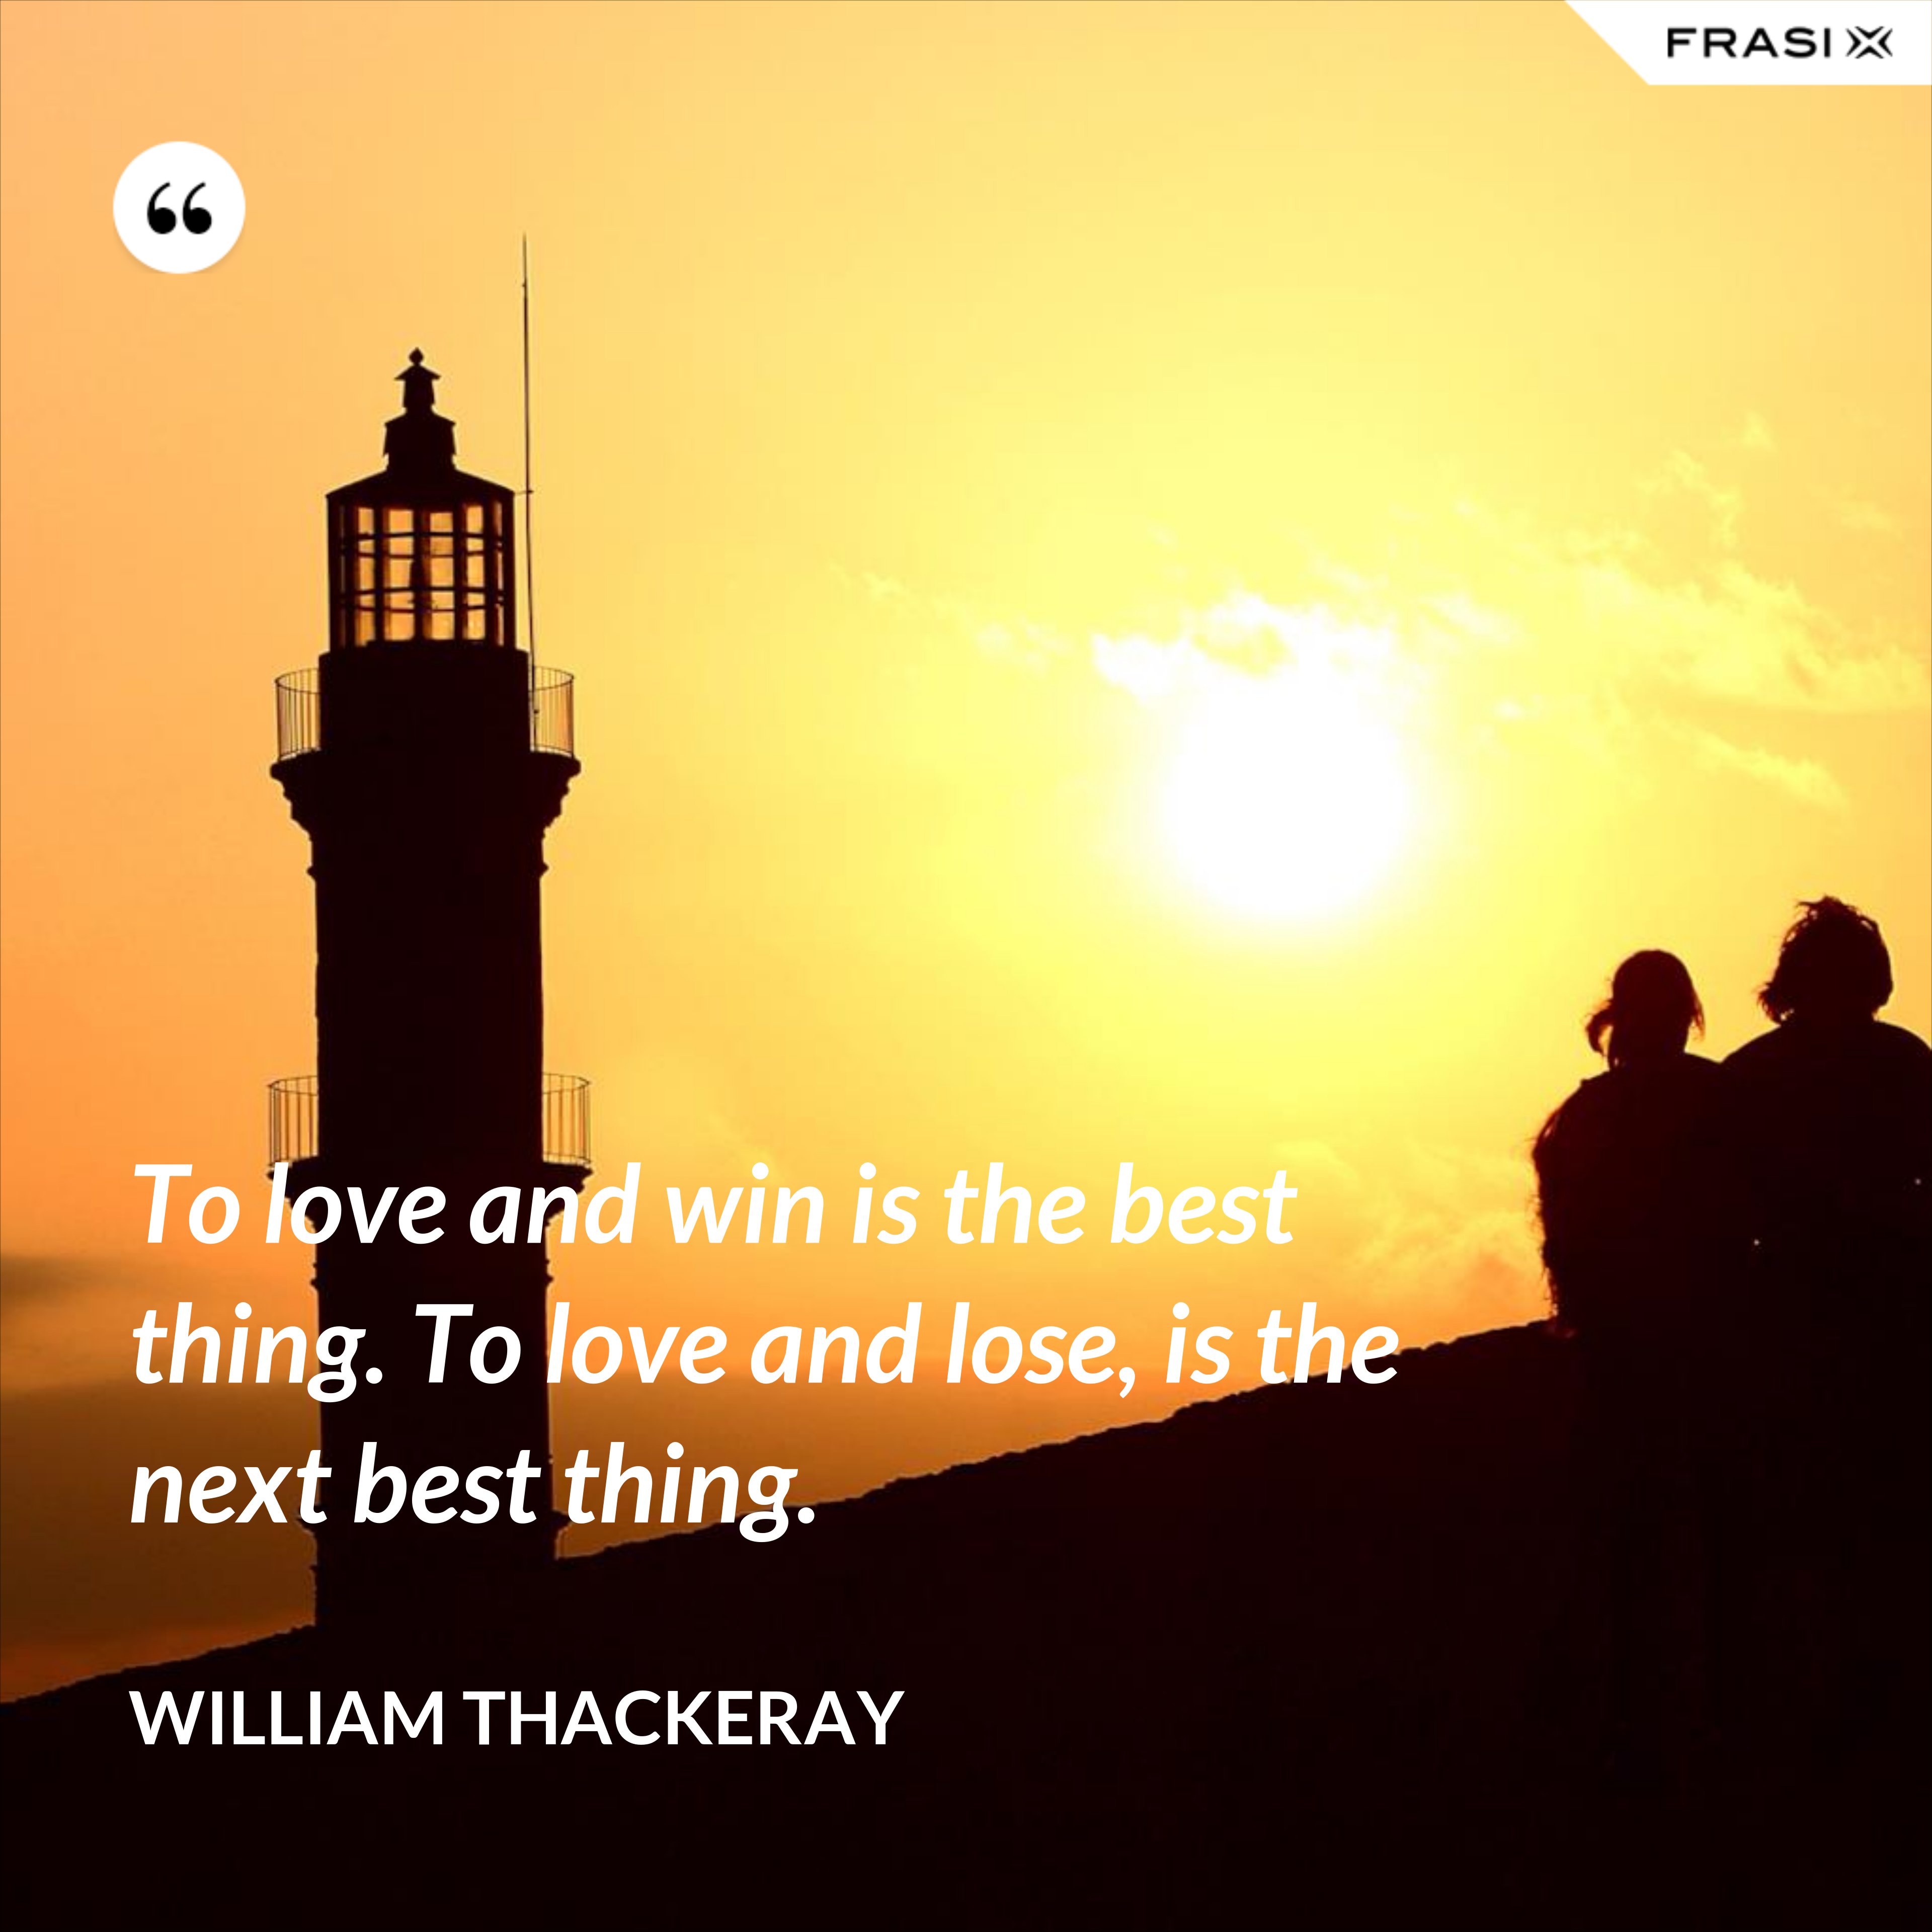 To love and win is the best thing. To love and lose, is the next best thing. - William Thackeray